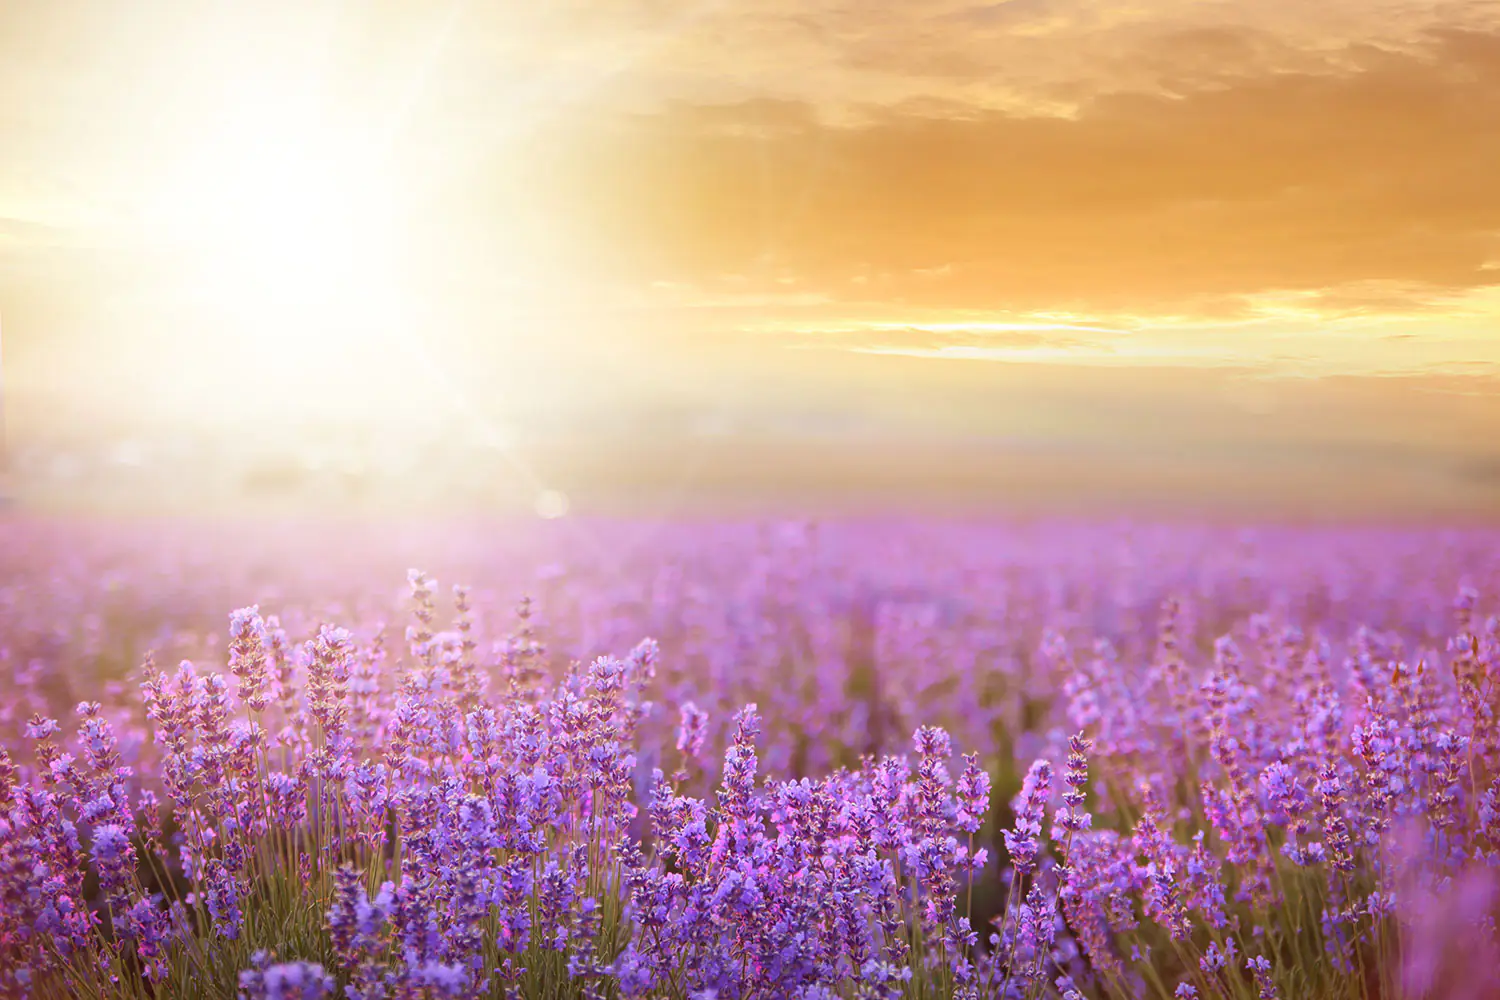 Wall Mural Photo Wallpaper Sunset In Lavender Field